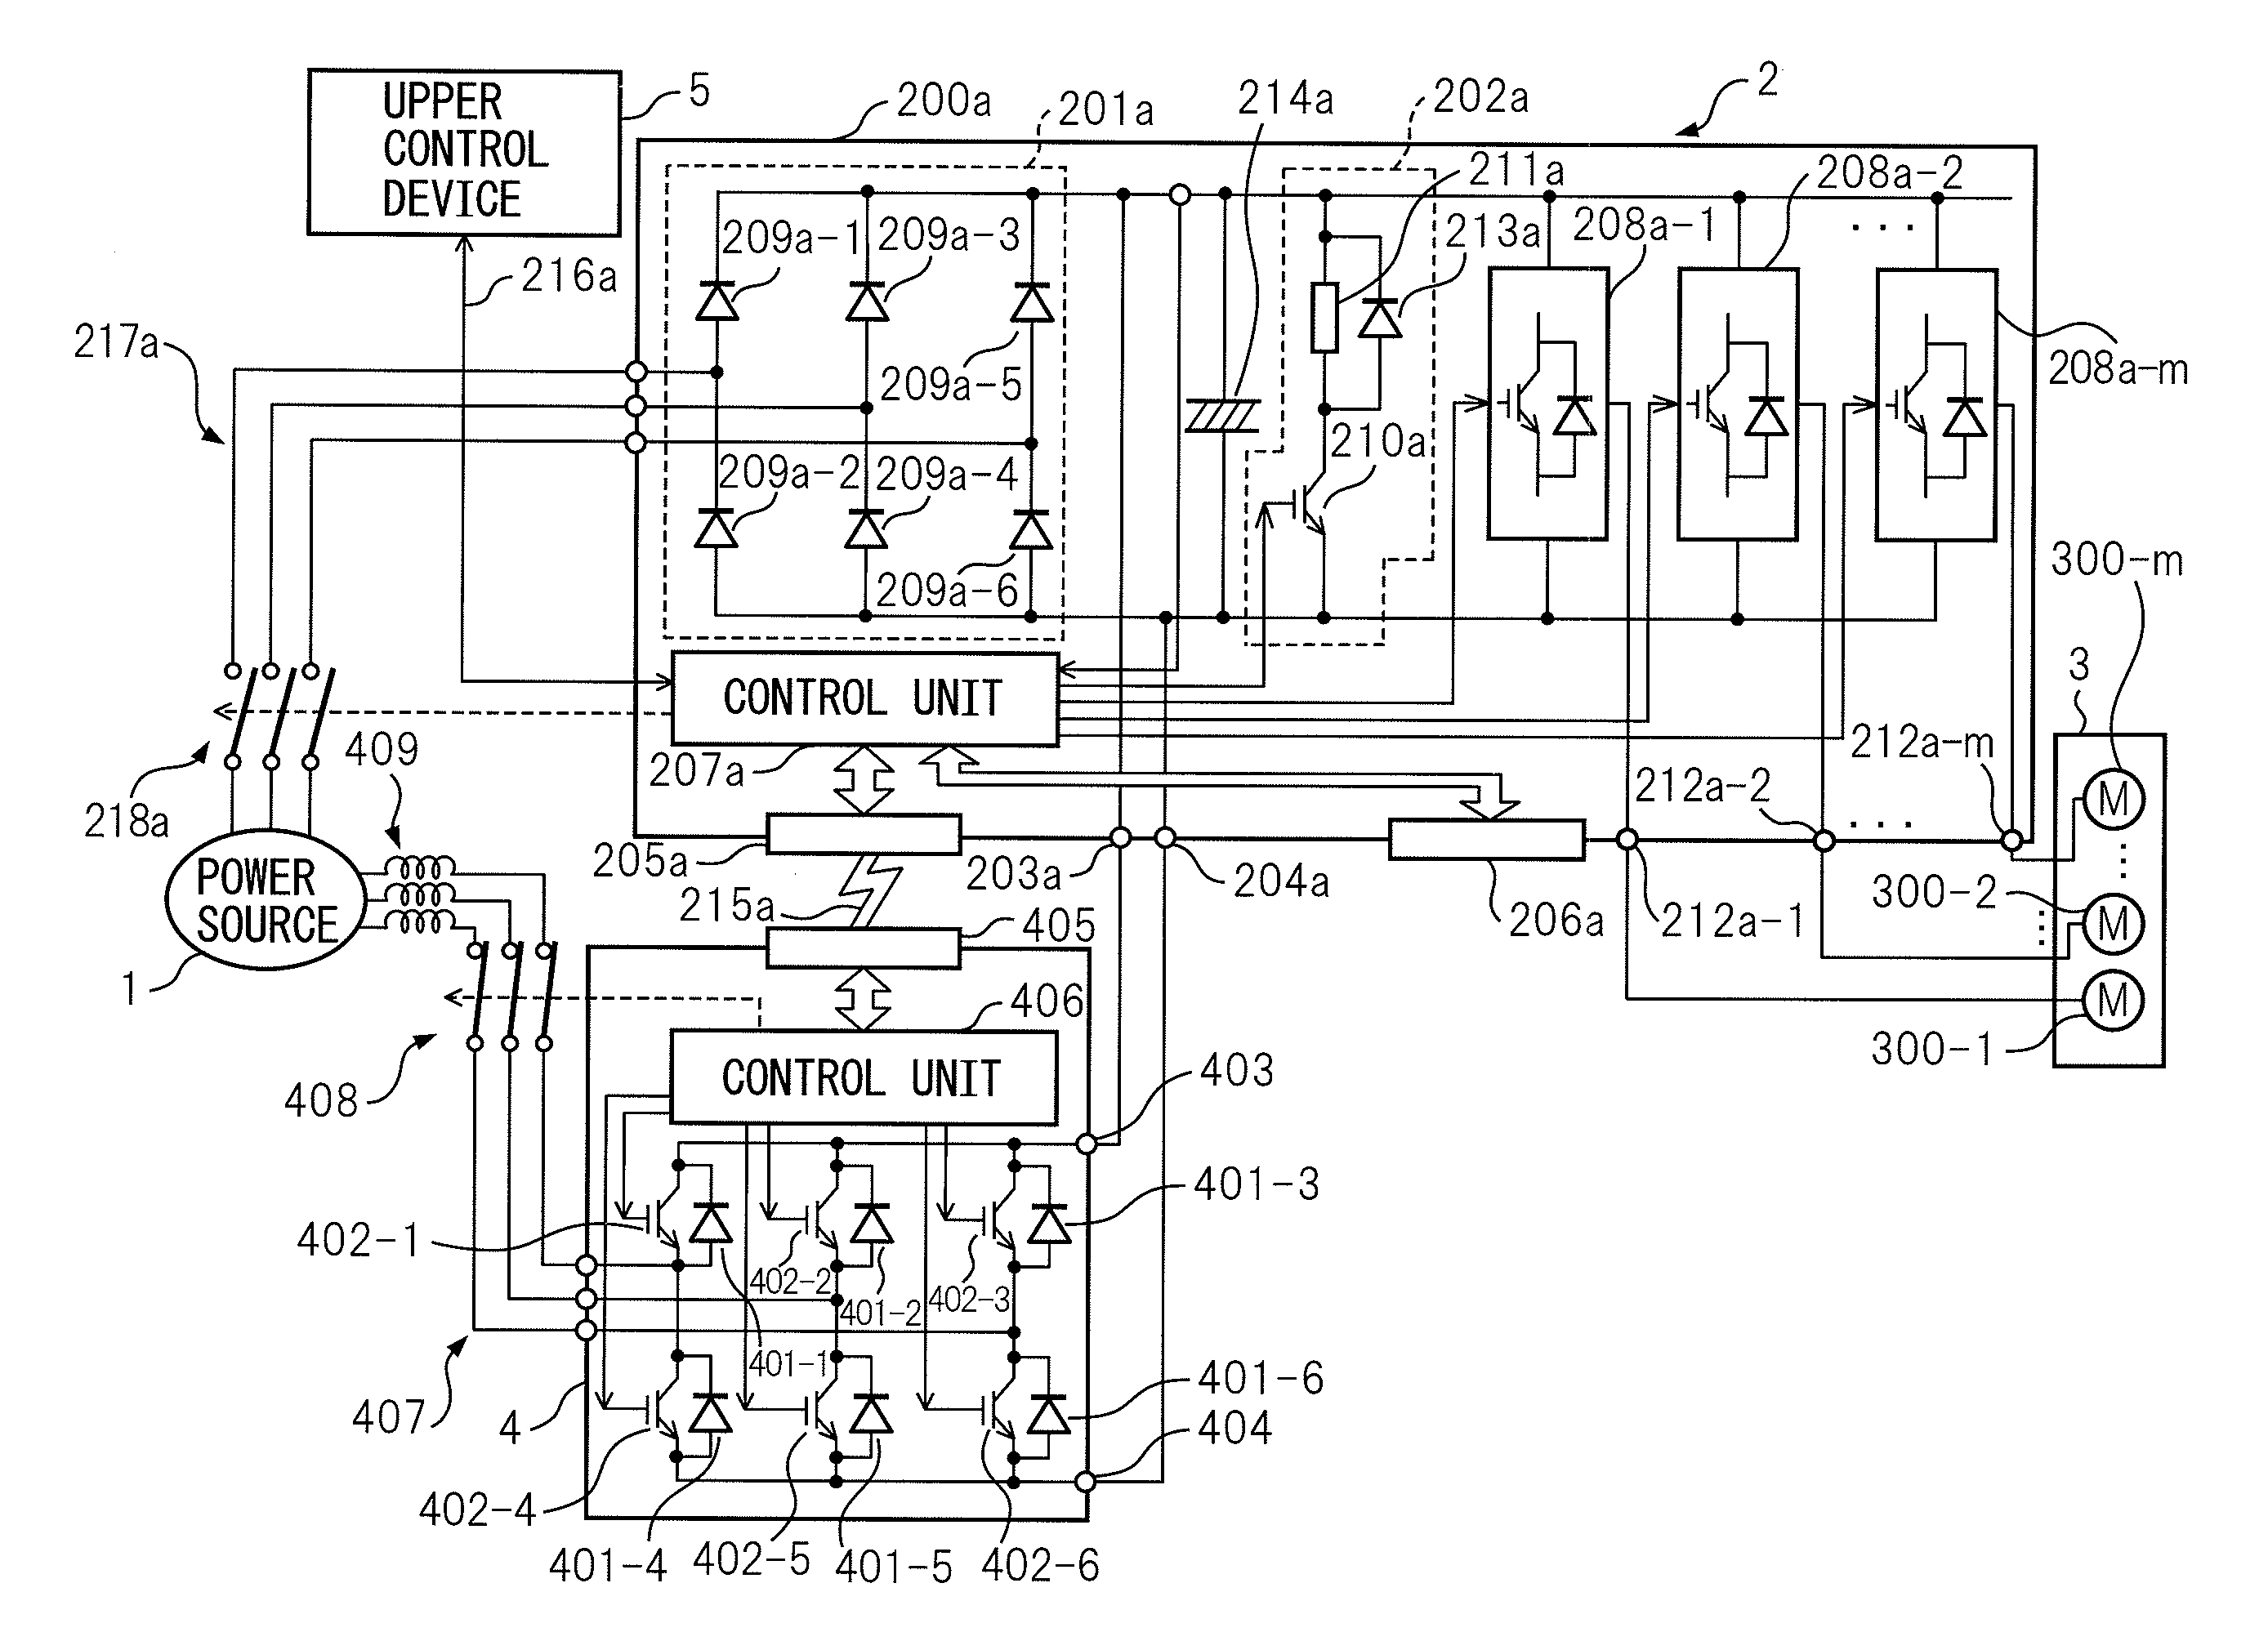 Servomotor drive device that drives servomotor connected to rotating shaft